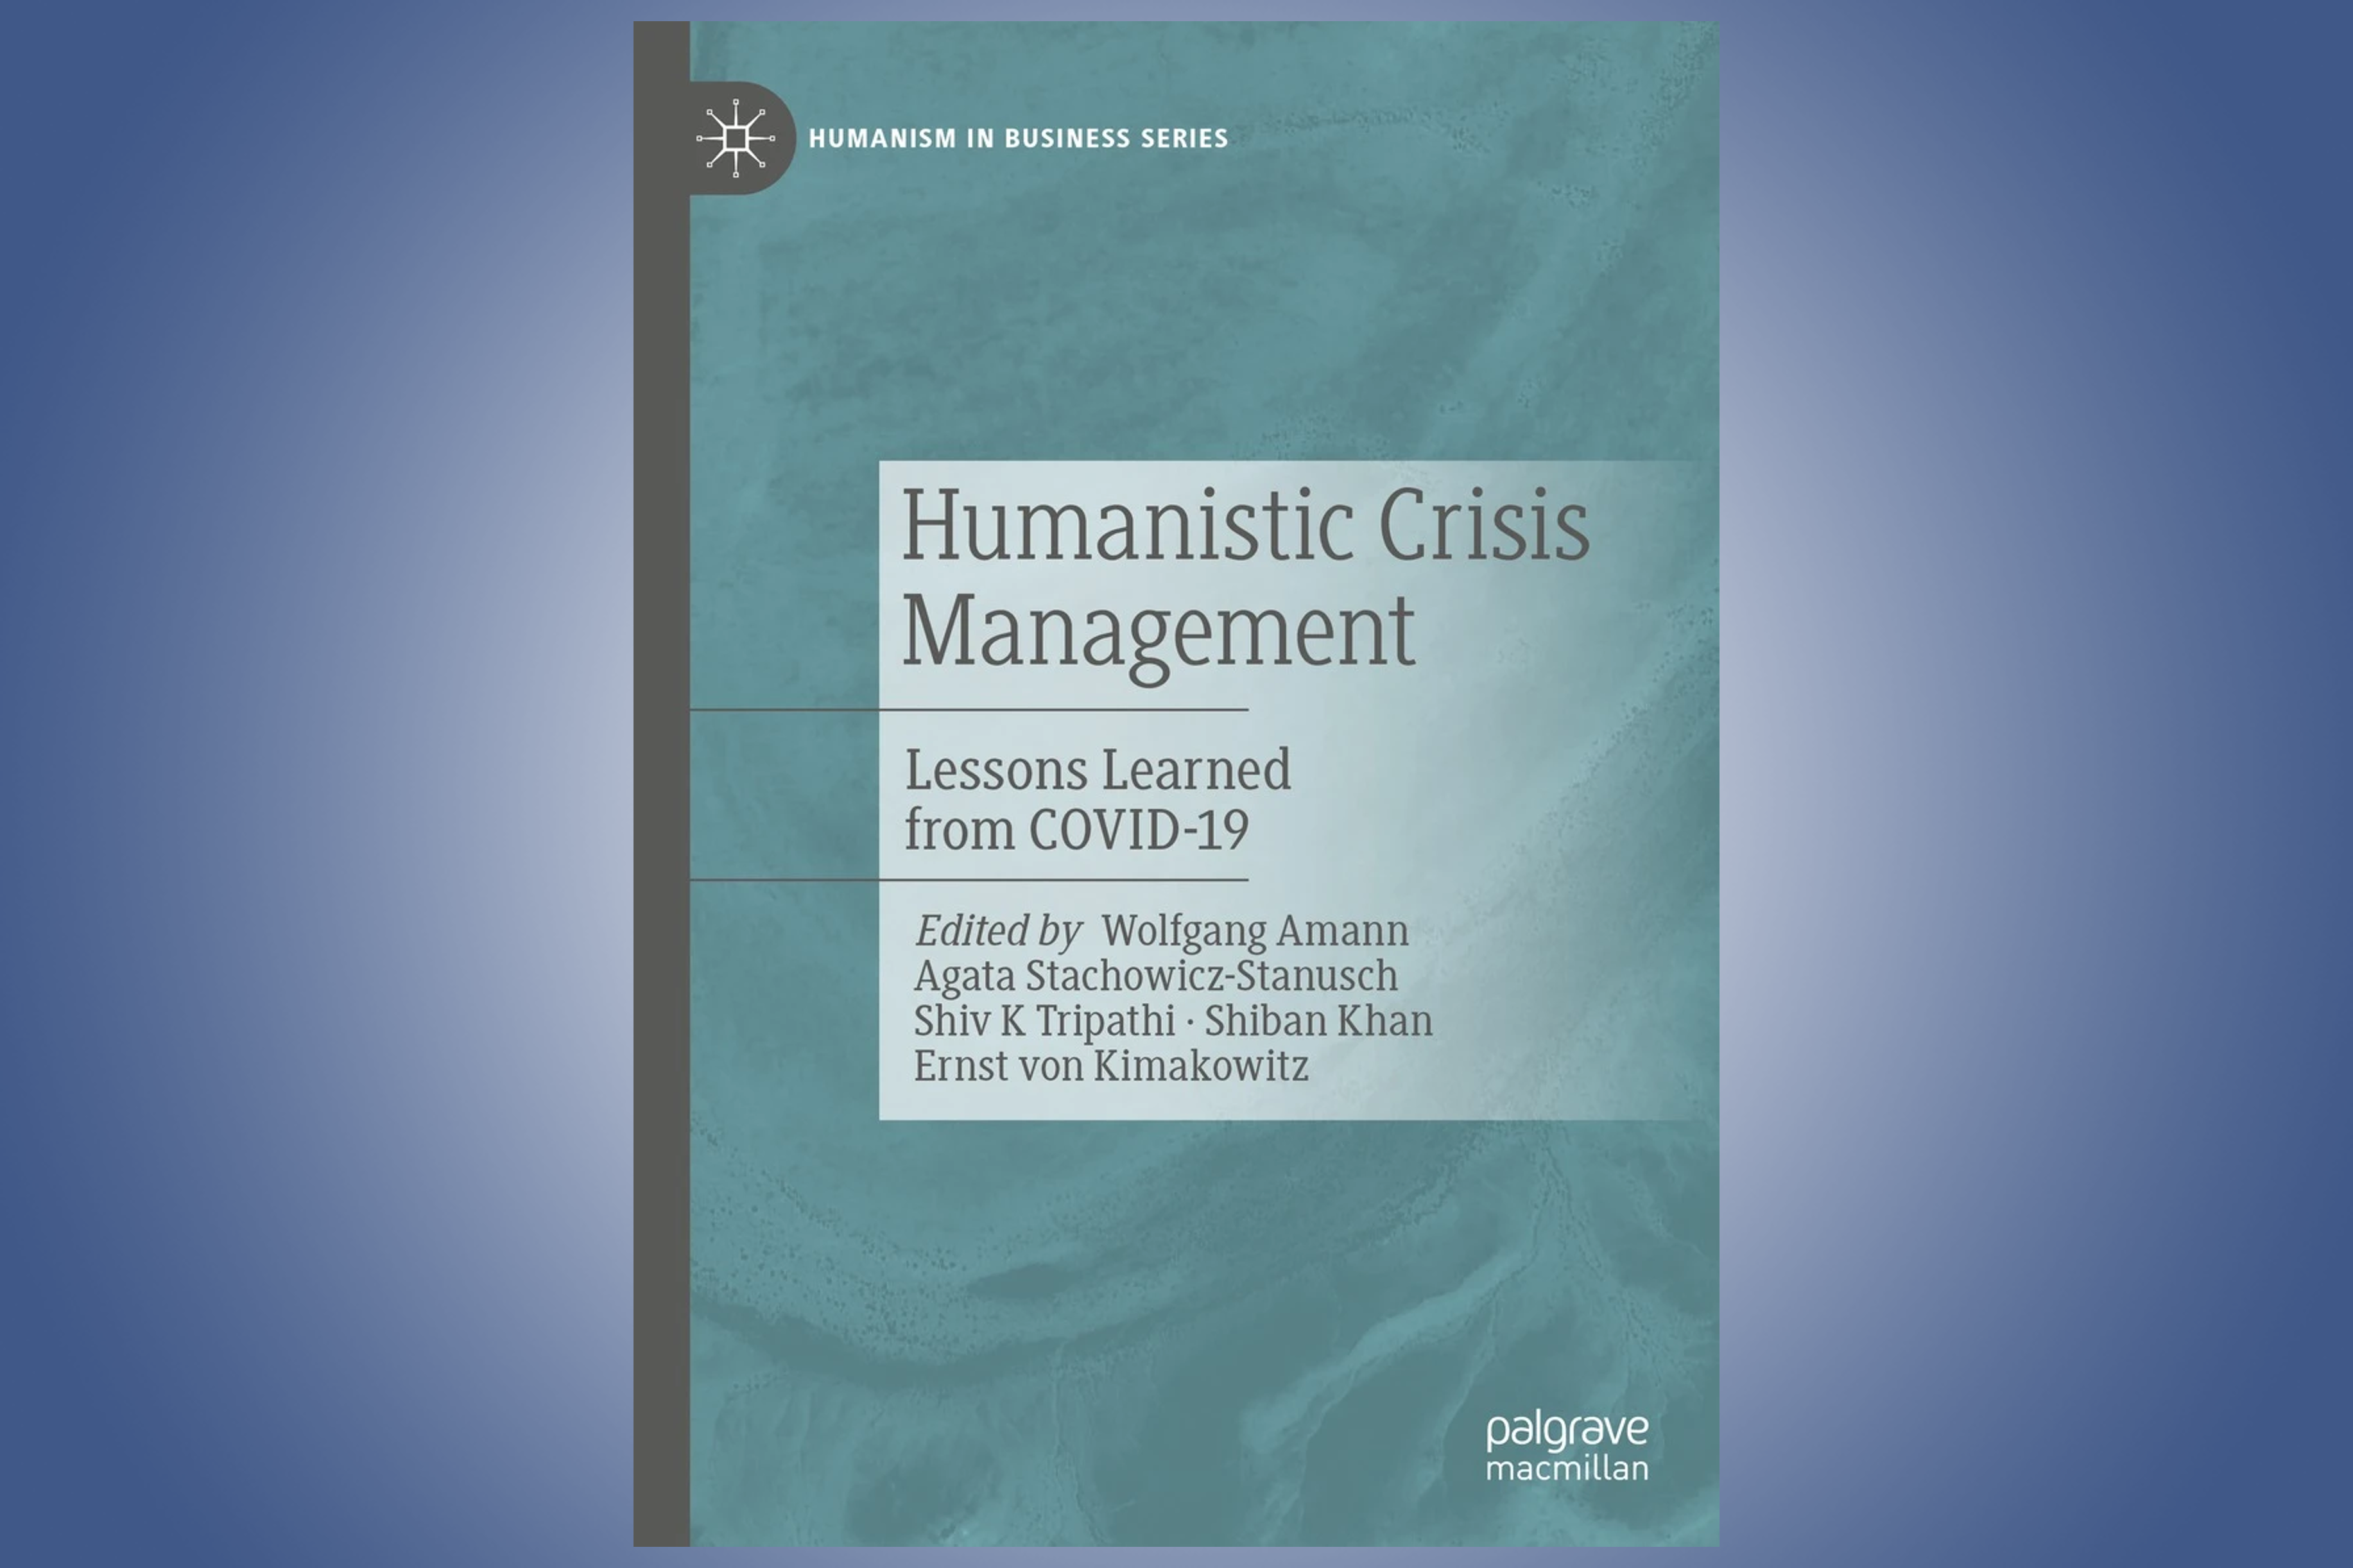 Humanistic Crisis Management – Lessons Learned from COVID-19